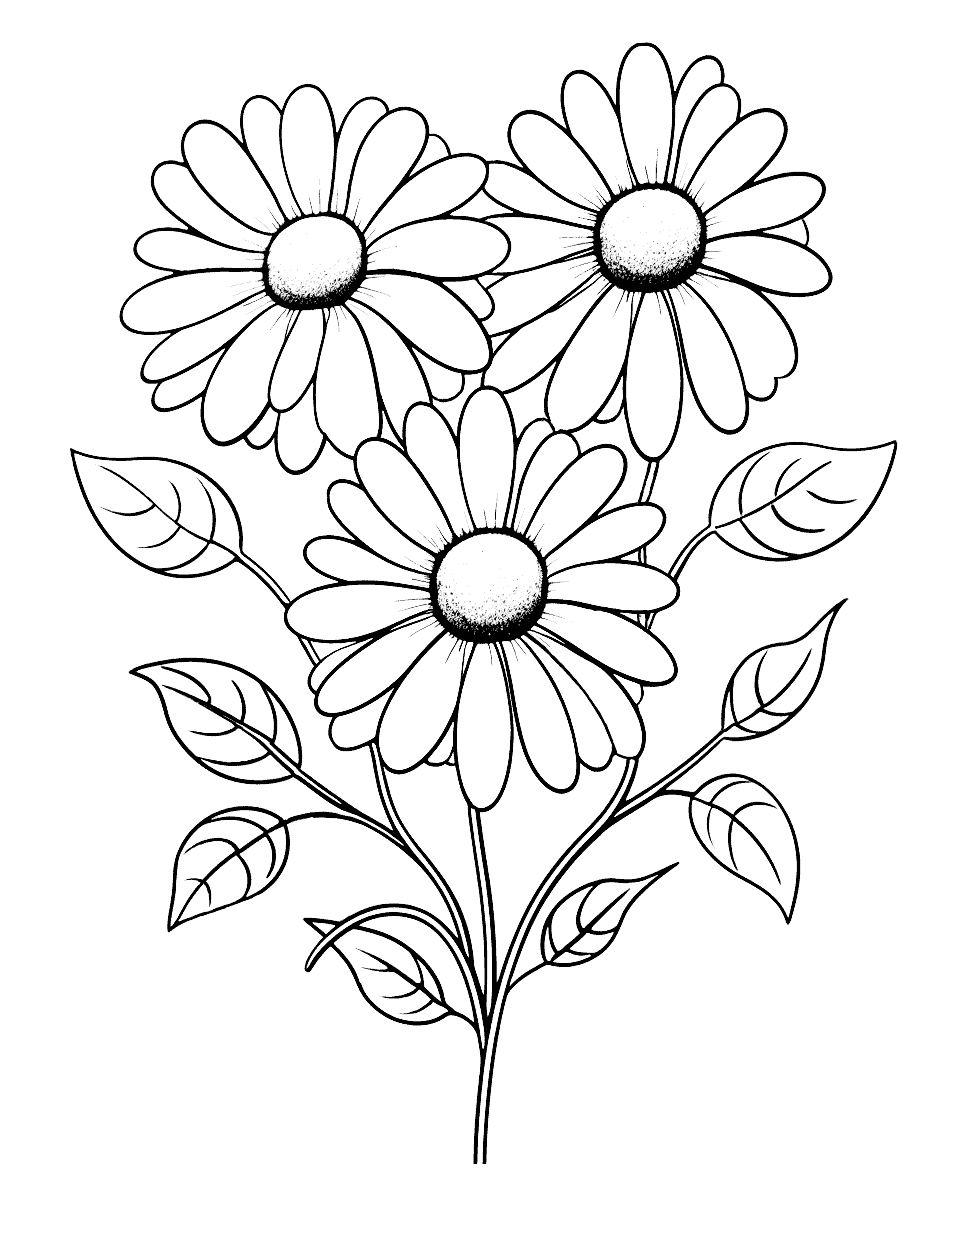 Daisy Love Flower Coloring Page - A heart shape filled with simple daisies, great for beginners.